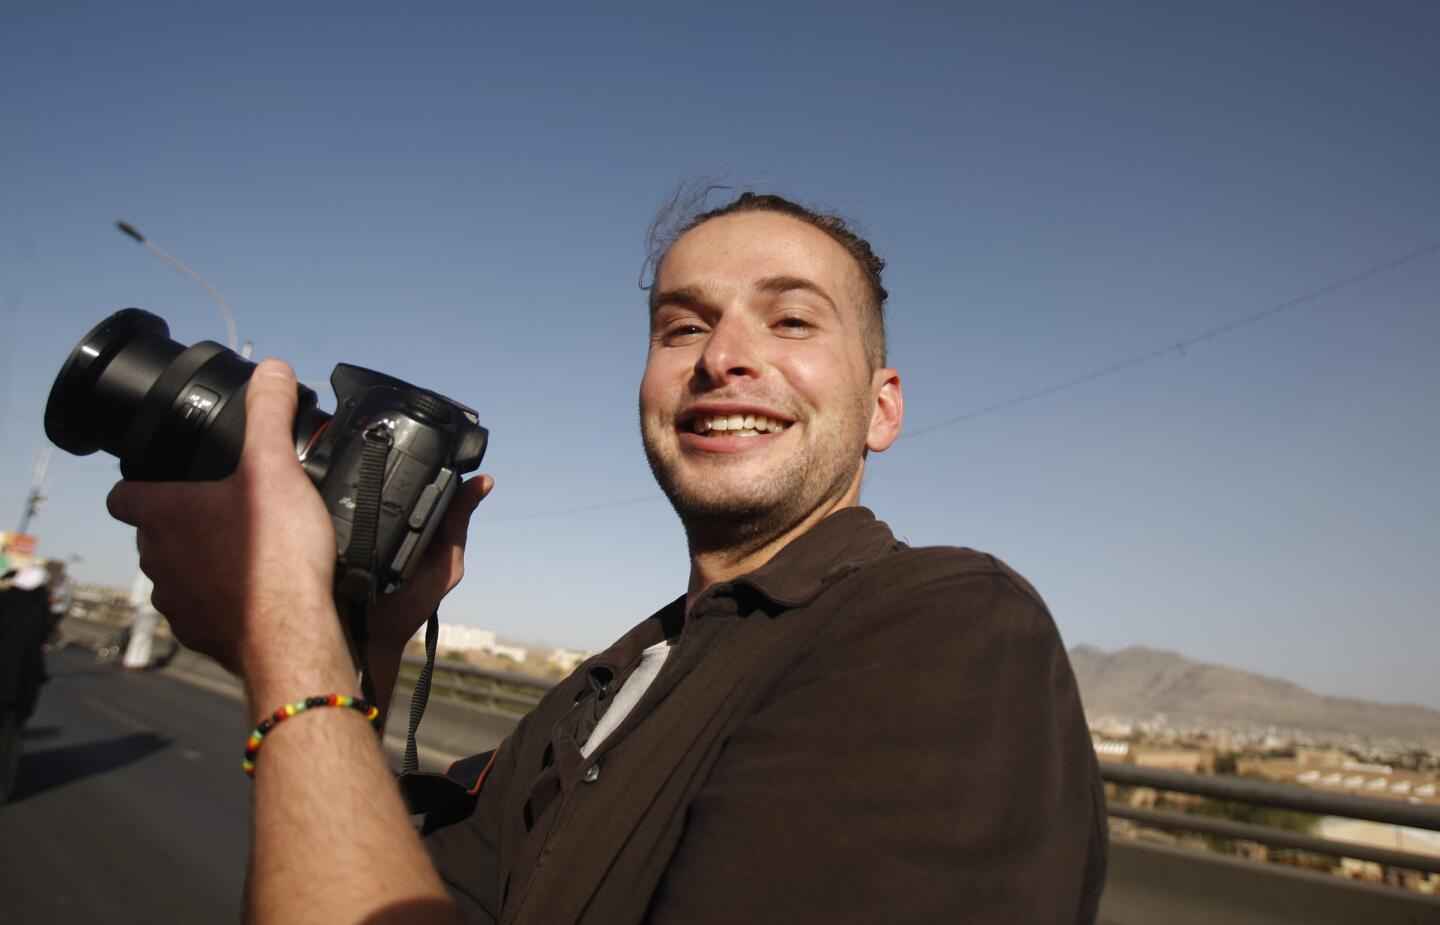 Luke Somers in February 2013. Somers was taken hostage by Al Qaeda 14 months ago and was killed by his captors as elite American troops tried to rescue him, the U.S. military said Saturday.